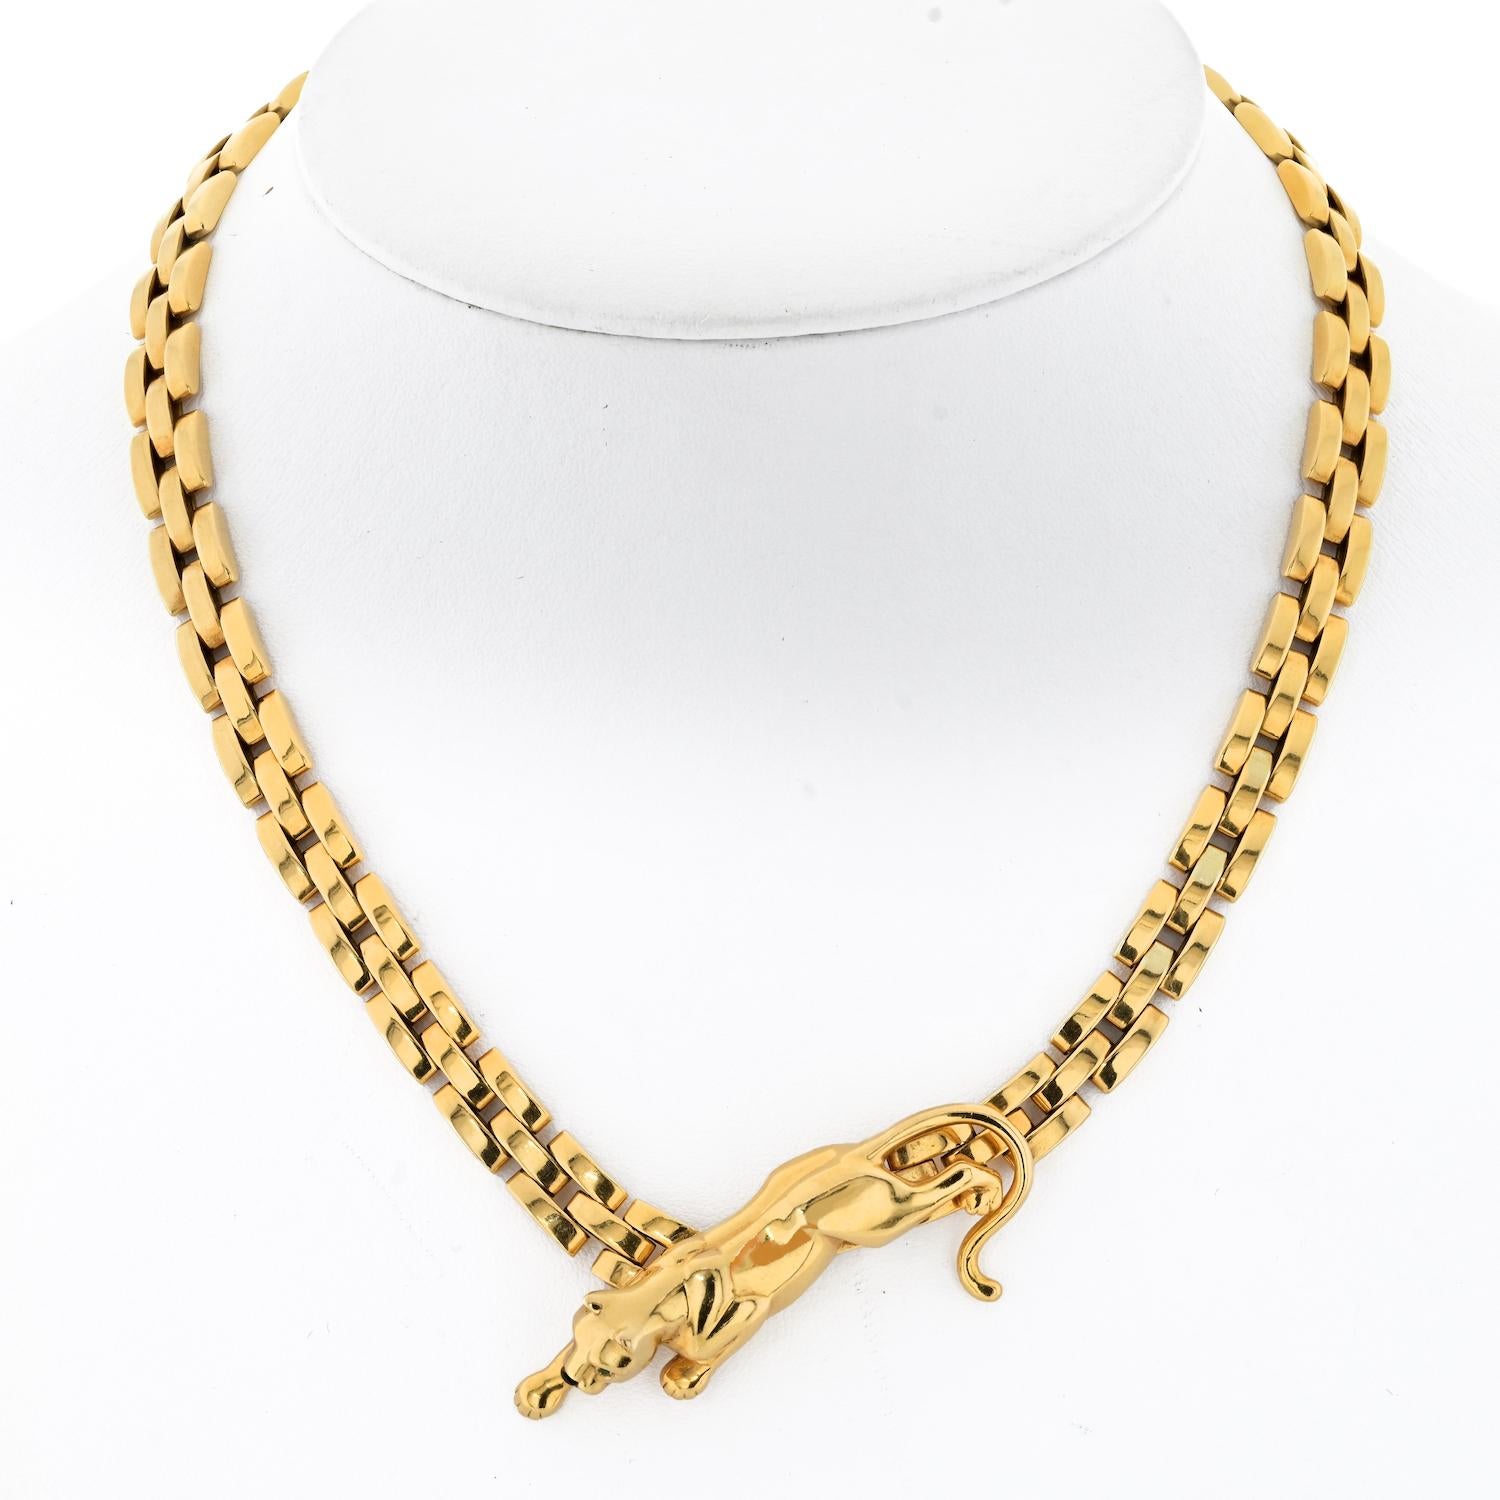 Indulge in the captivating allure of the iconic Cartier Panthere with this exquisite 18K Yellow Gold Panther 3 Row Maillon Necklace. The centerpiece of this opulent necklace is a Panther in motion, exquisitely crafted with meticulous attention to